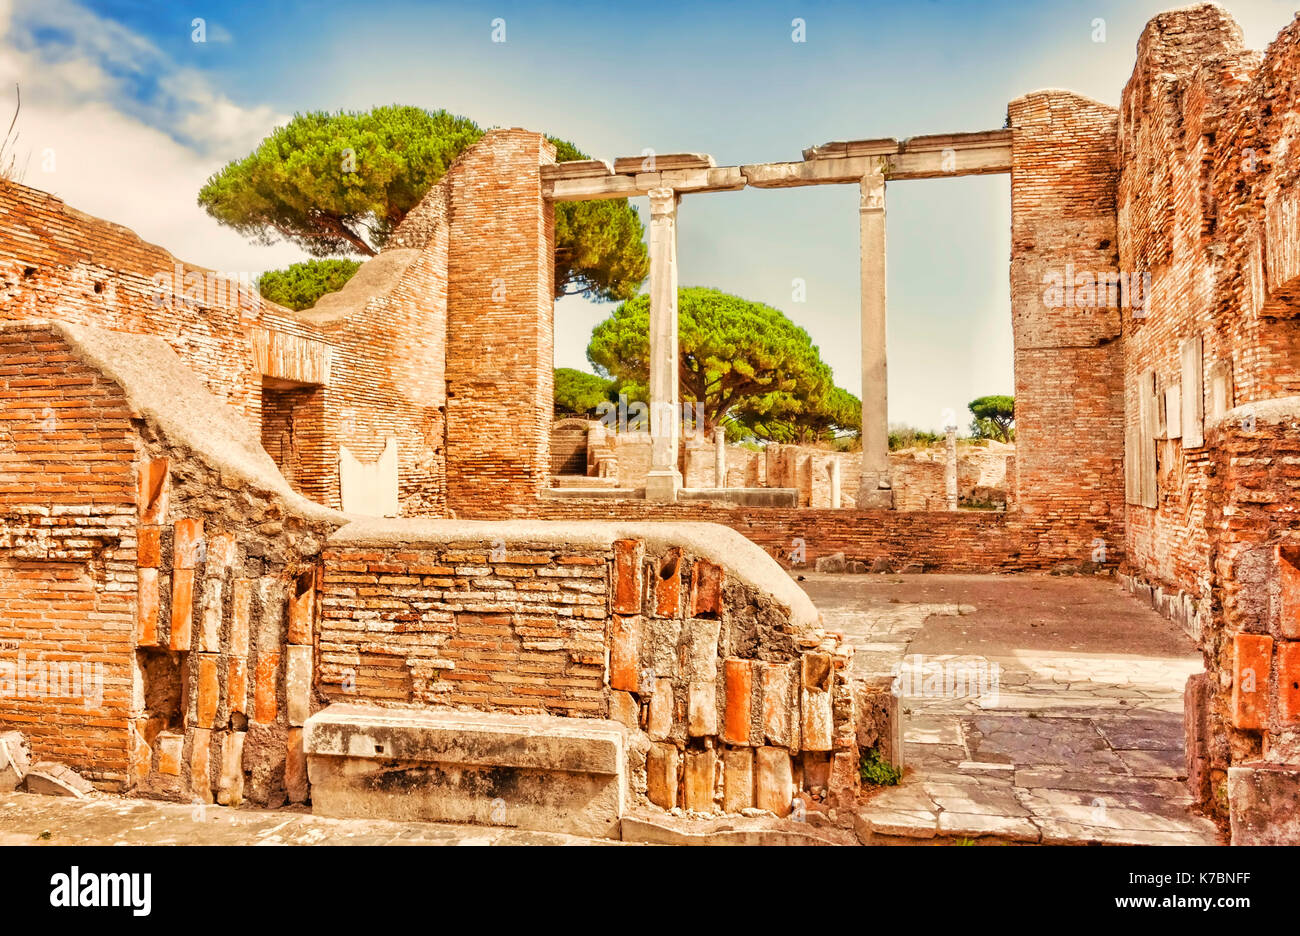 Archaeological Roman ruins in Ostia Antica - Rome - Italy Stock Photo